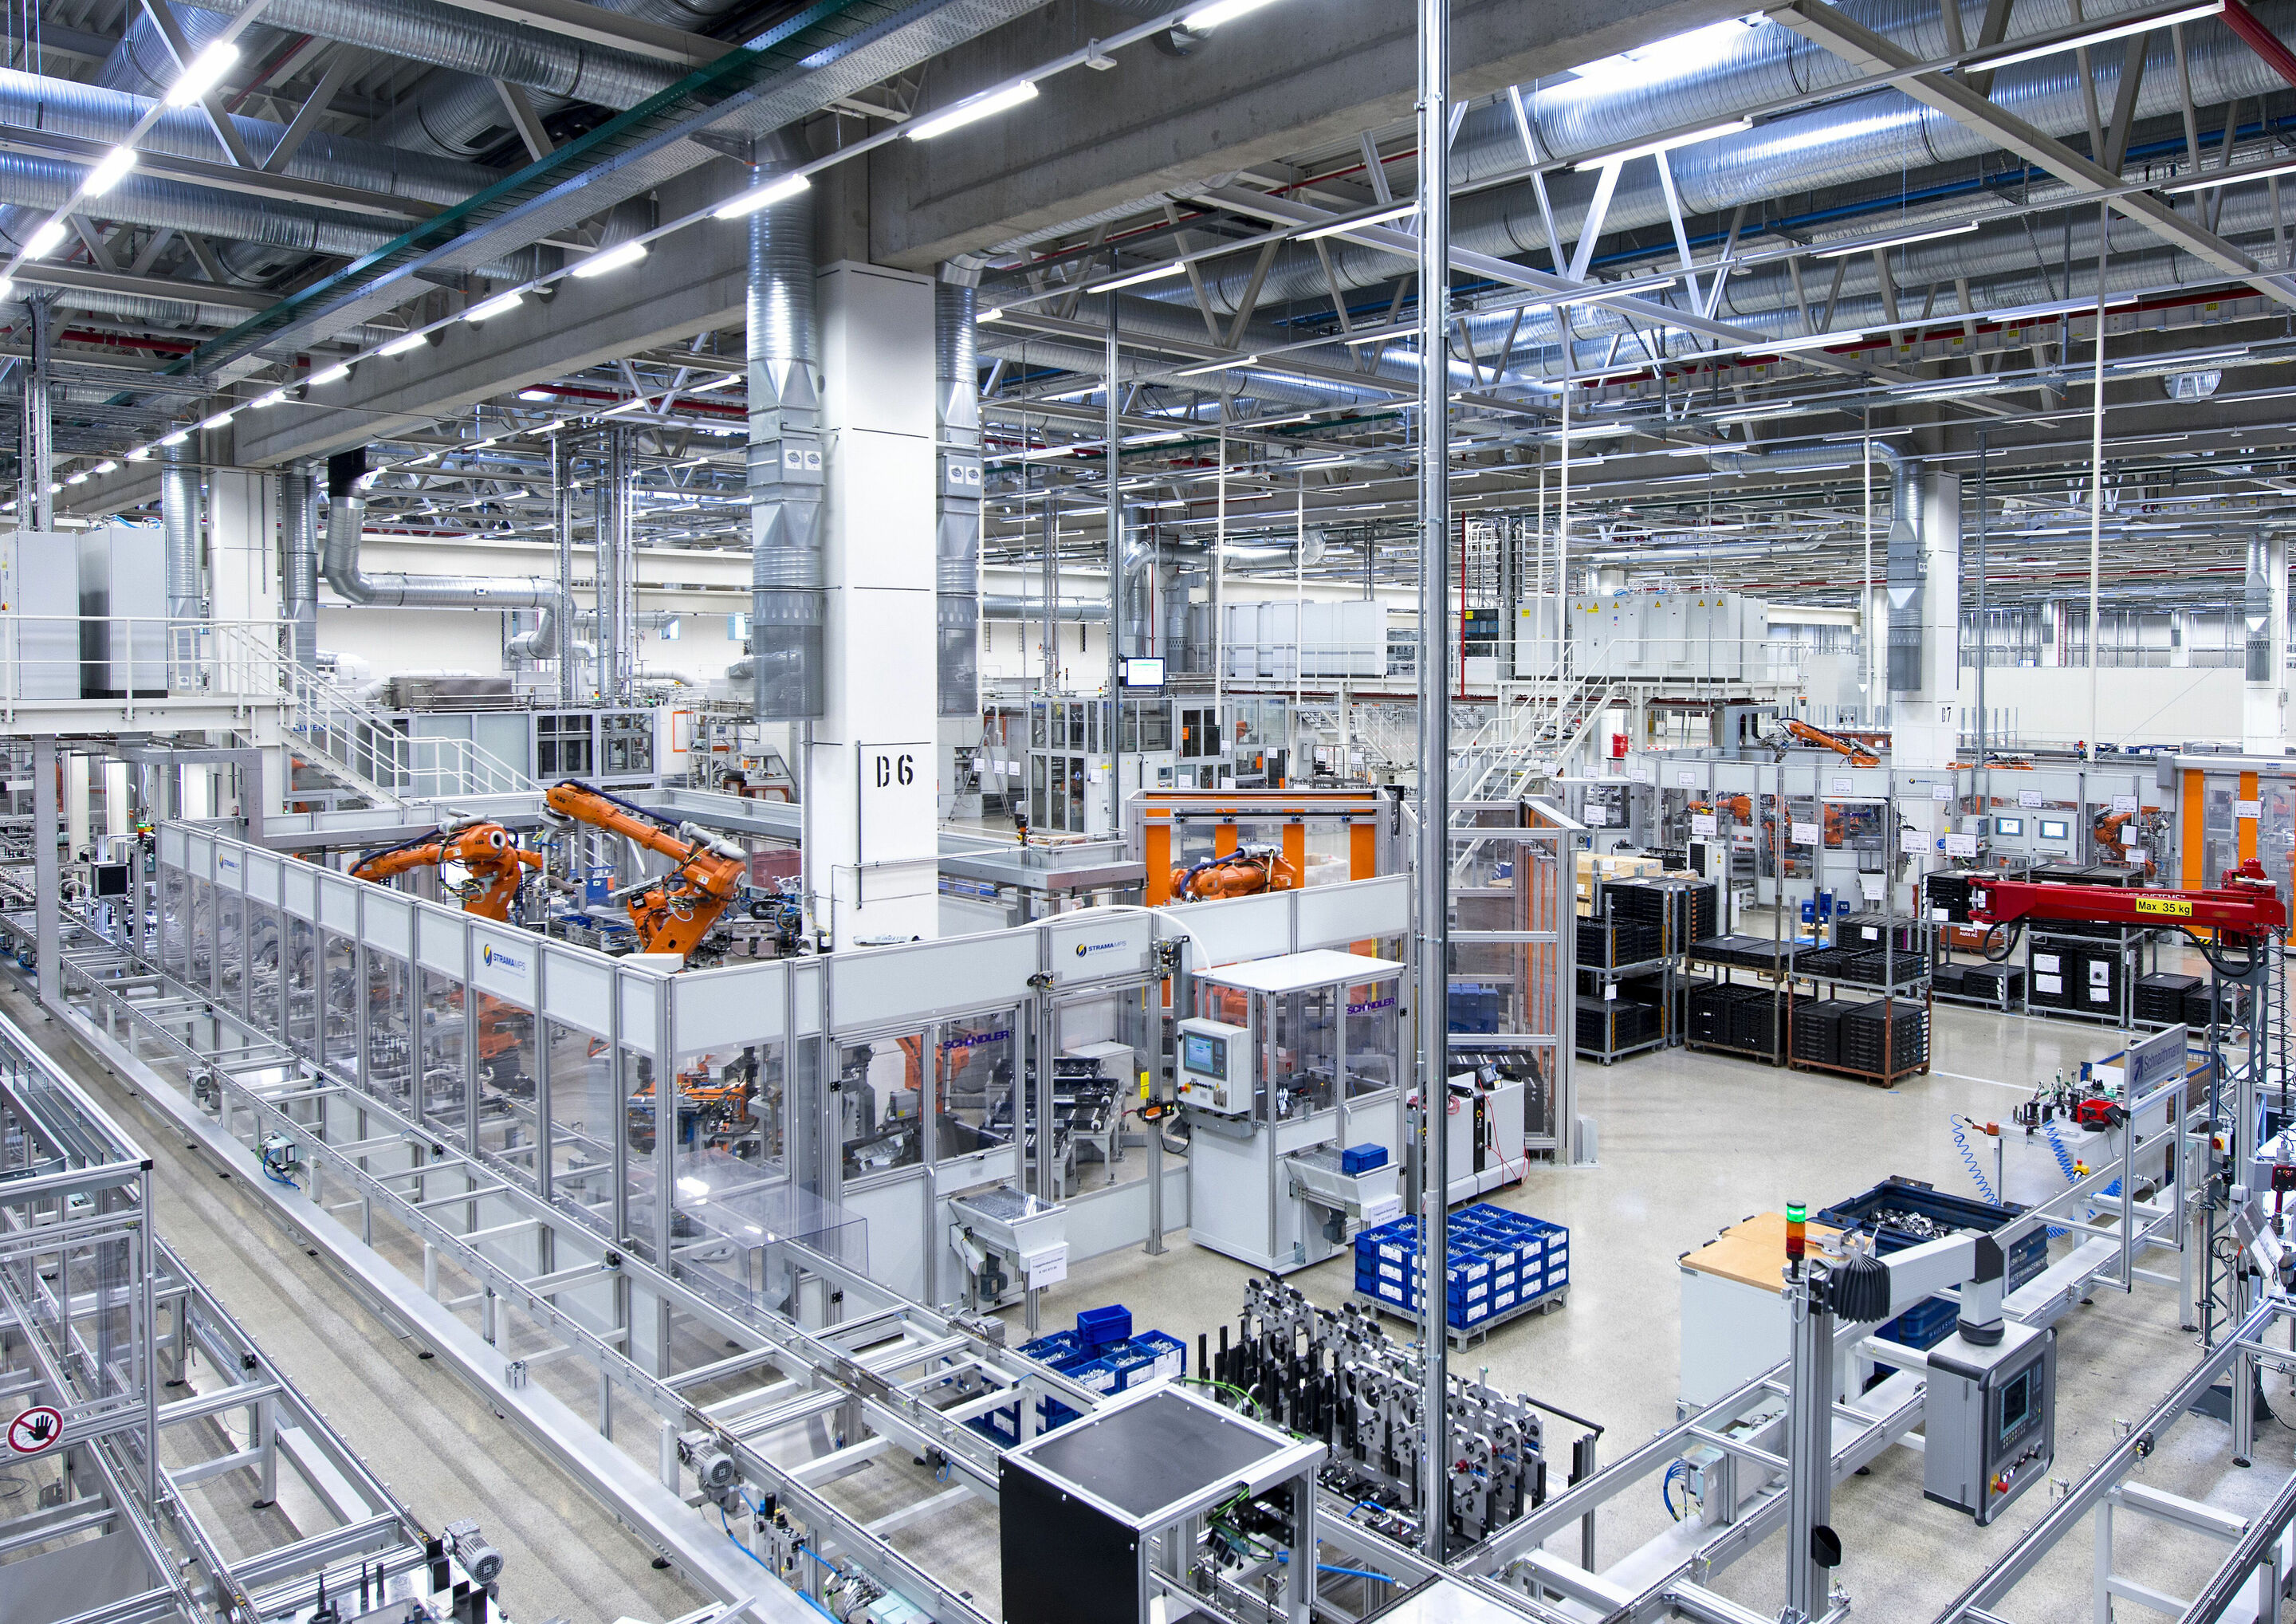 Audi production in Münchsmünster is picking up speed